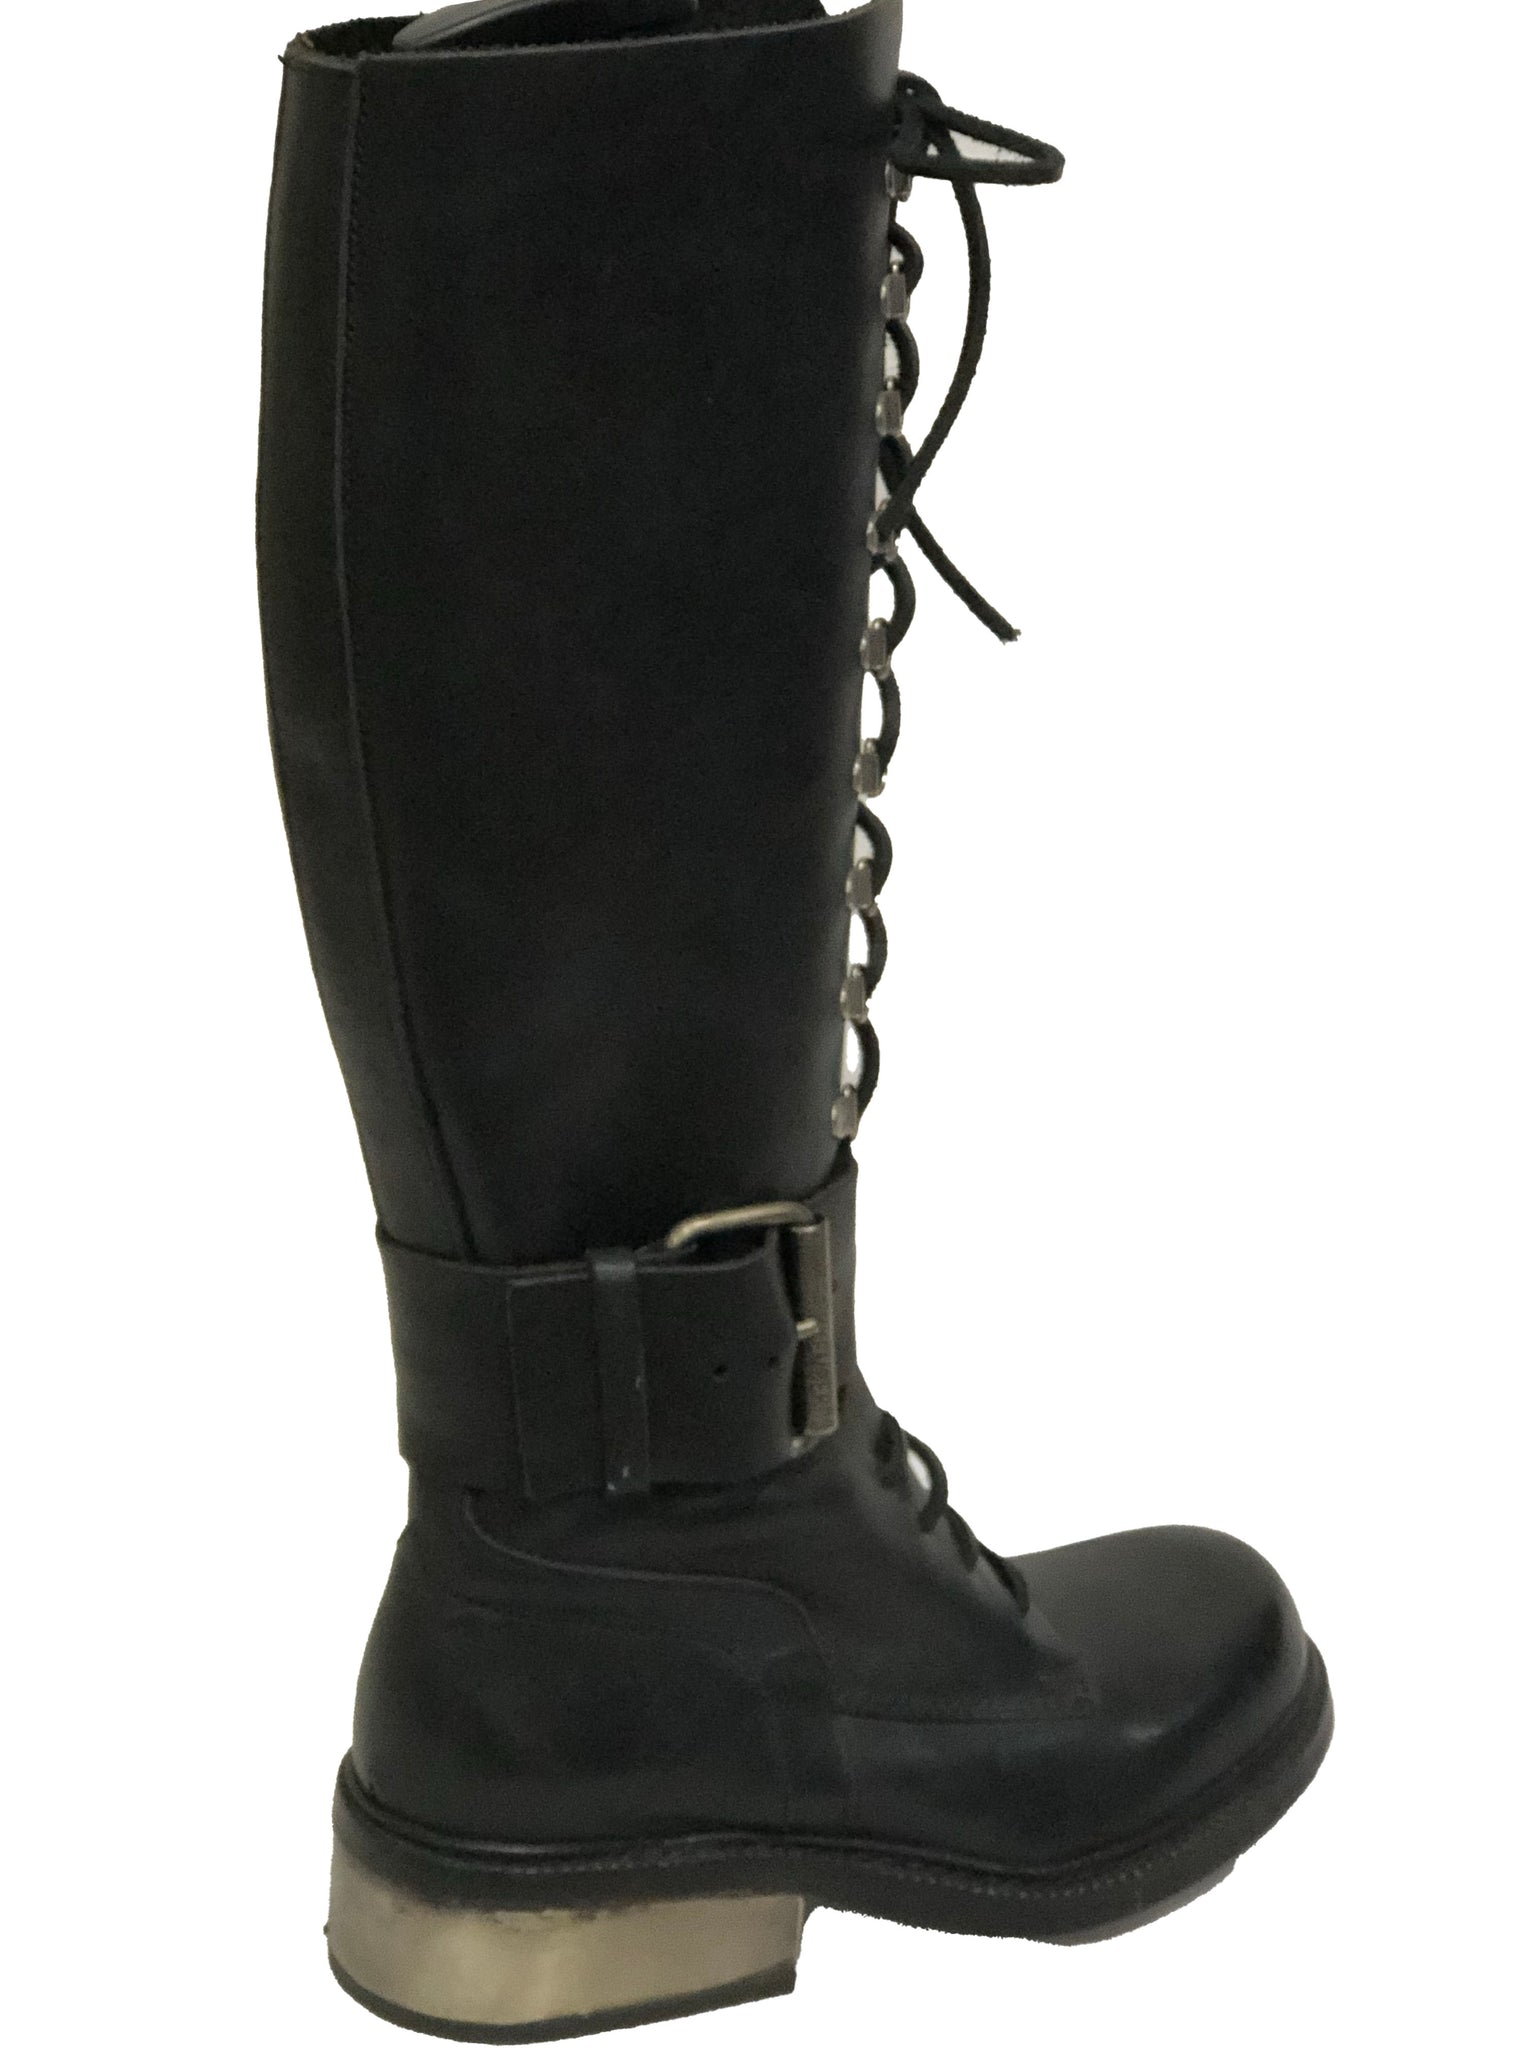 Dirk Bikkembergs 90s Tall Lace Up Boots with Buckle BACK 3 of 6